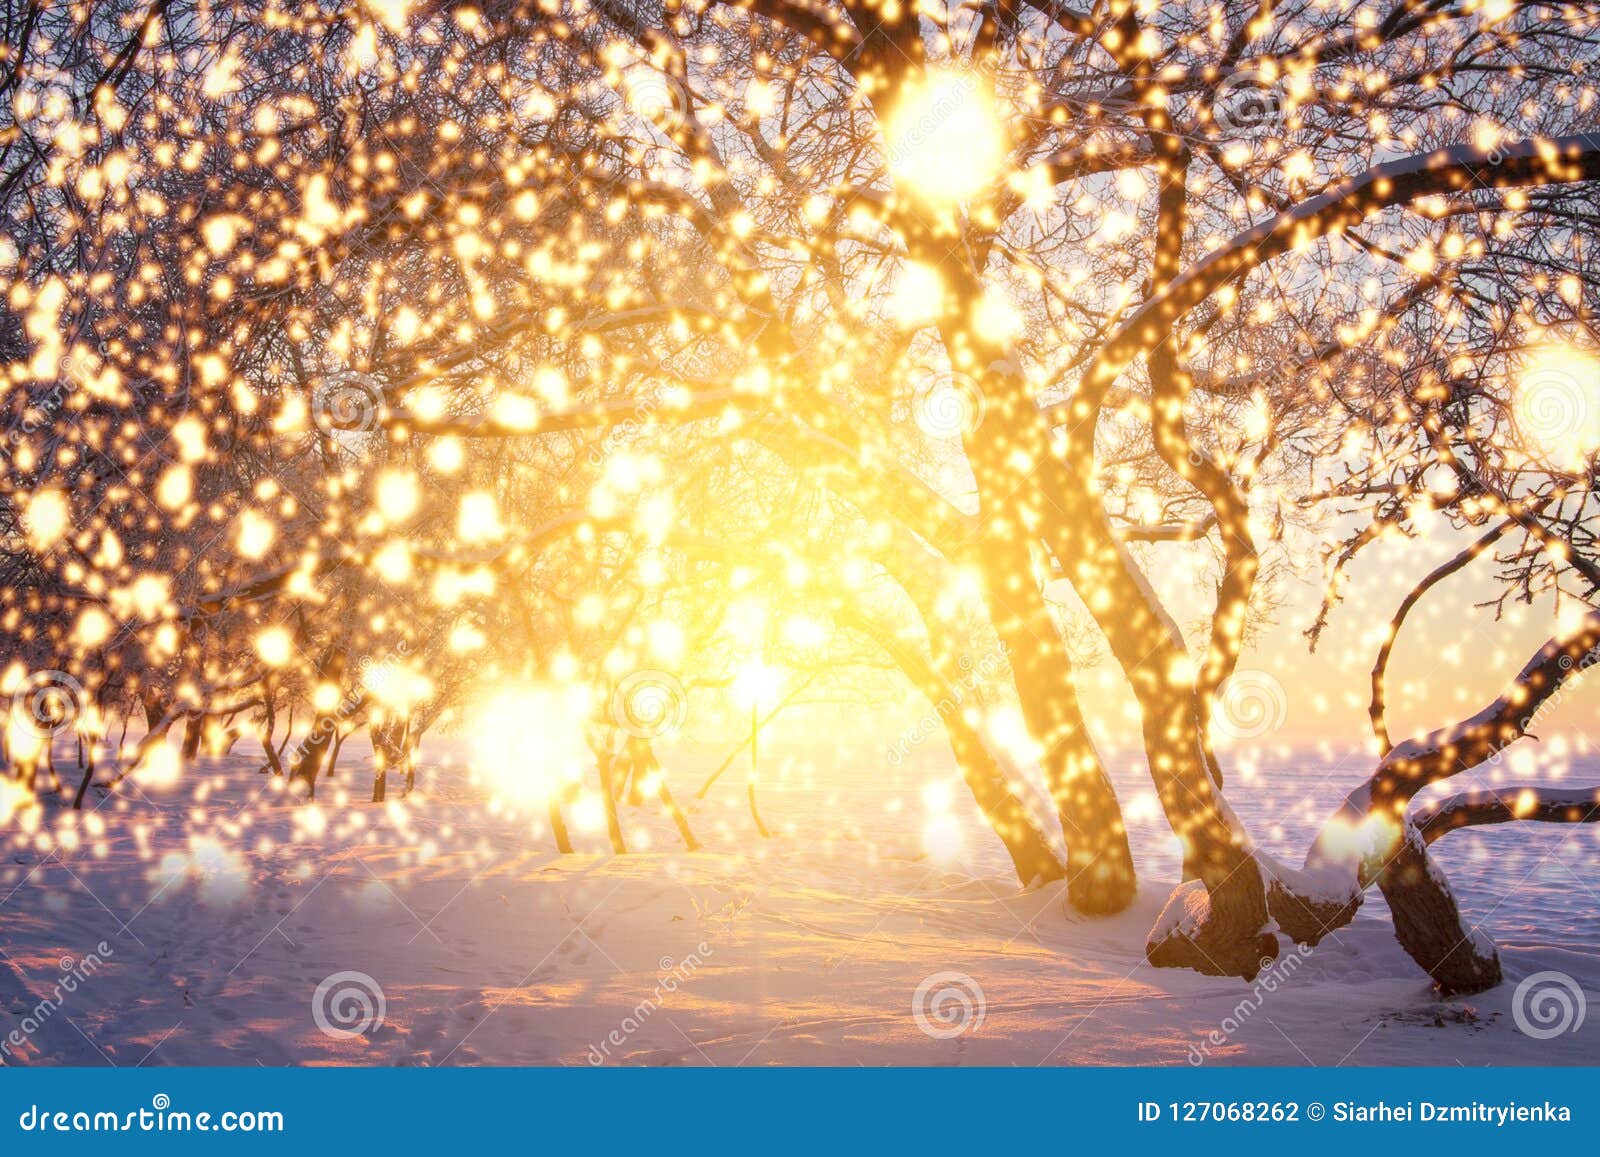 Christmas Background With Glowing Snowflakes Shining Magic Lights In